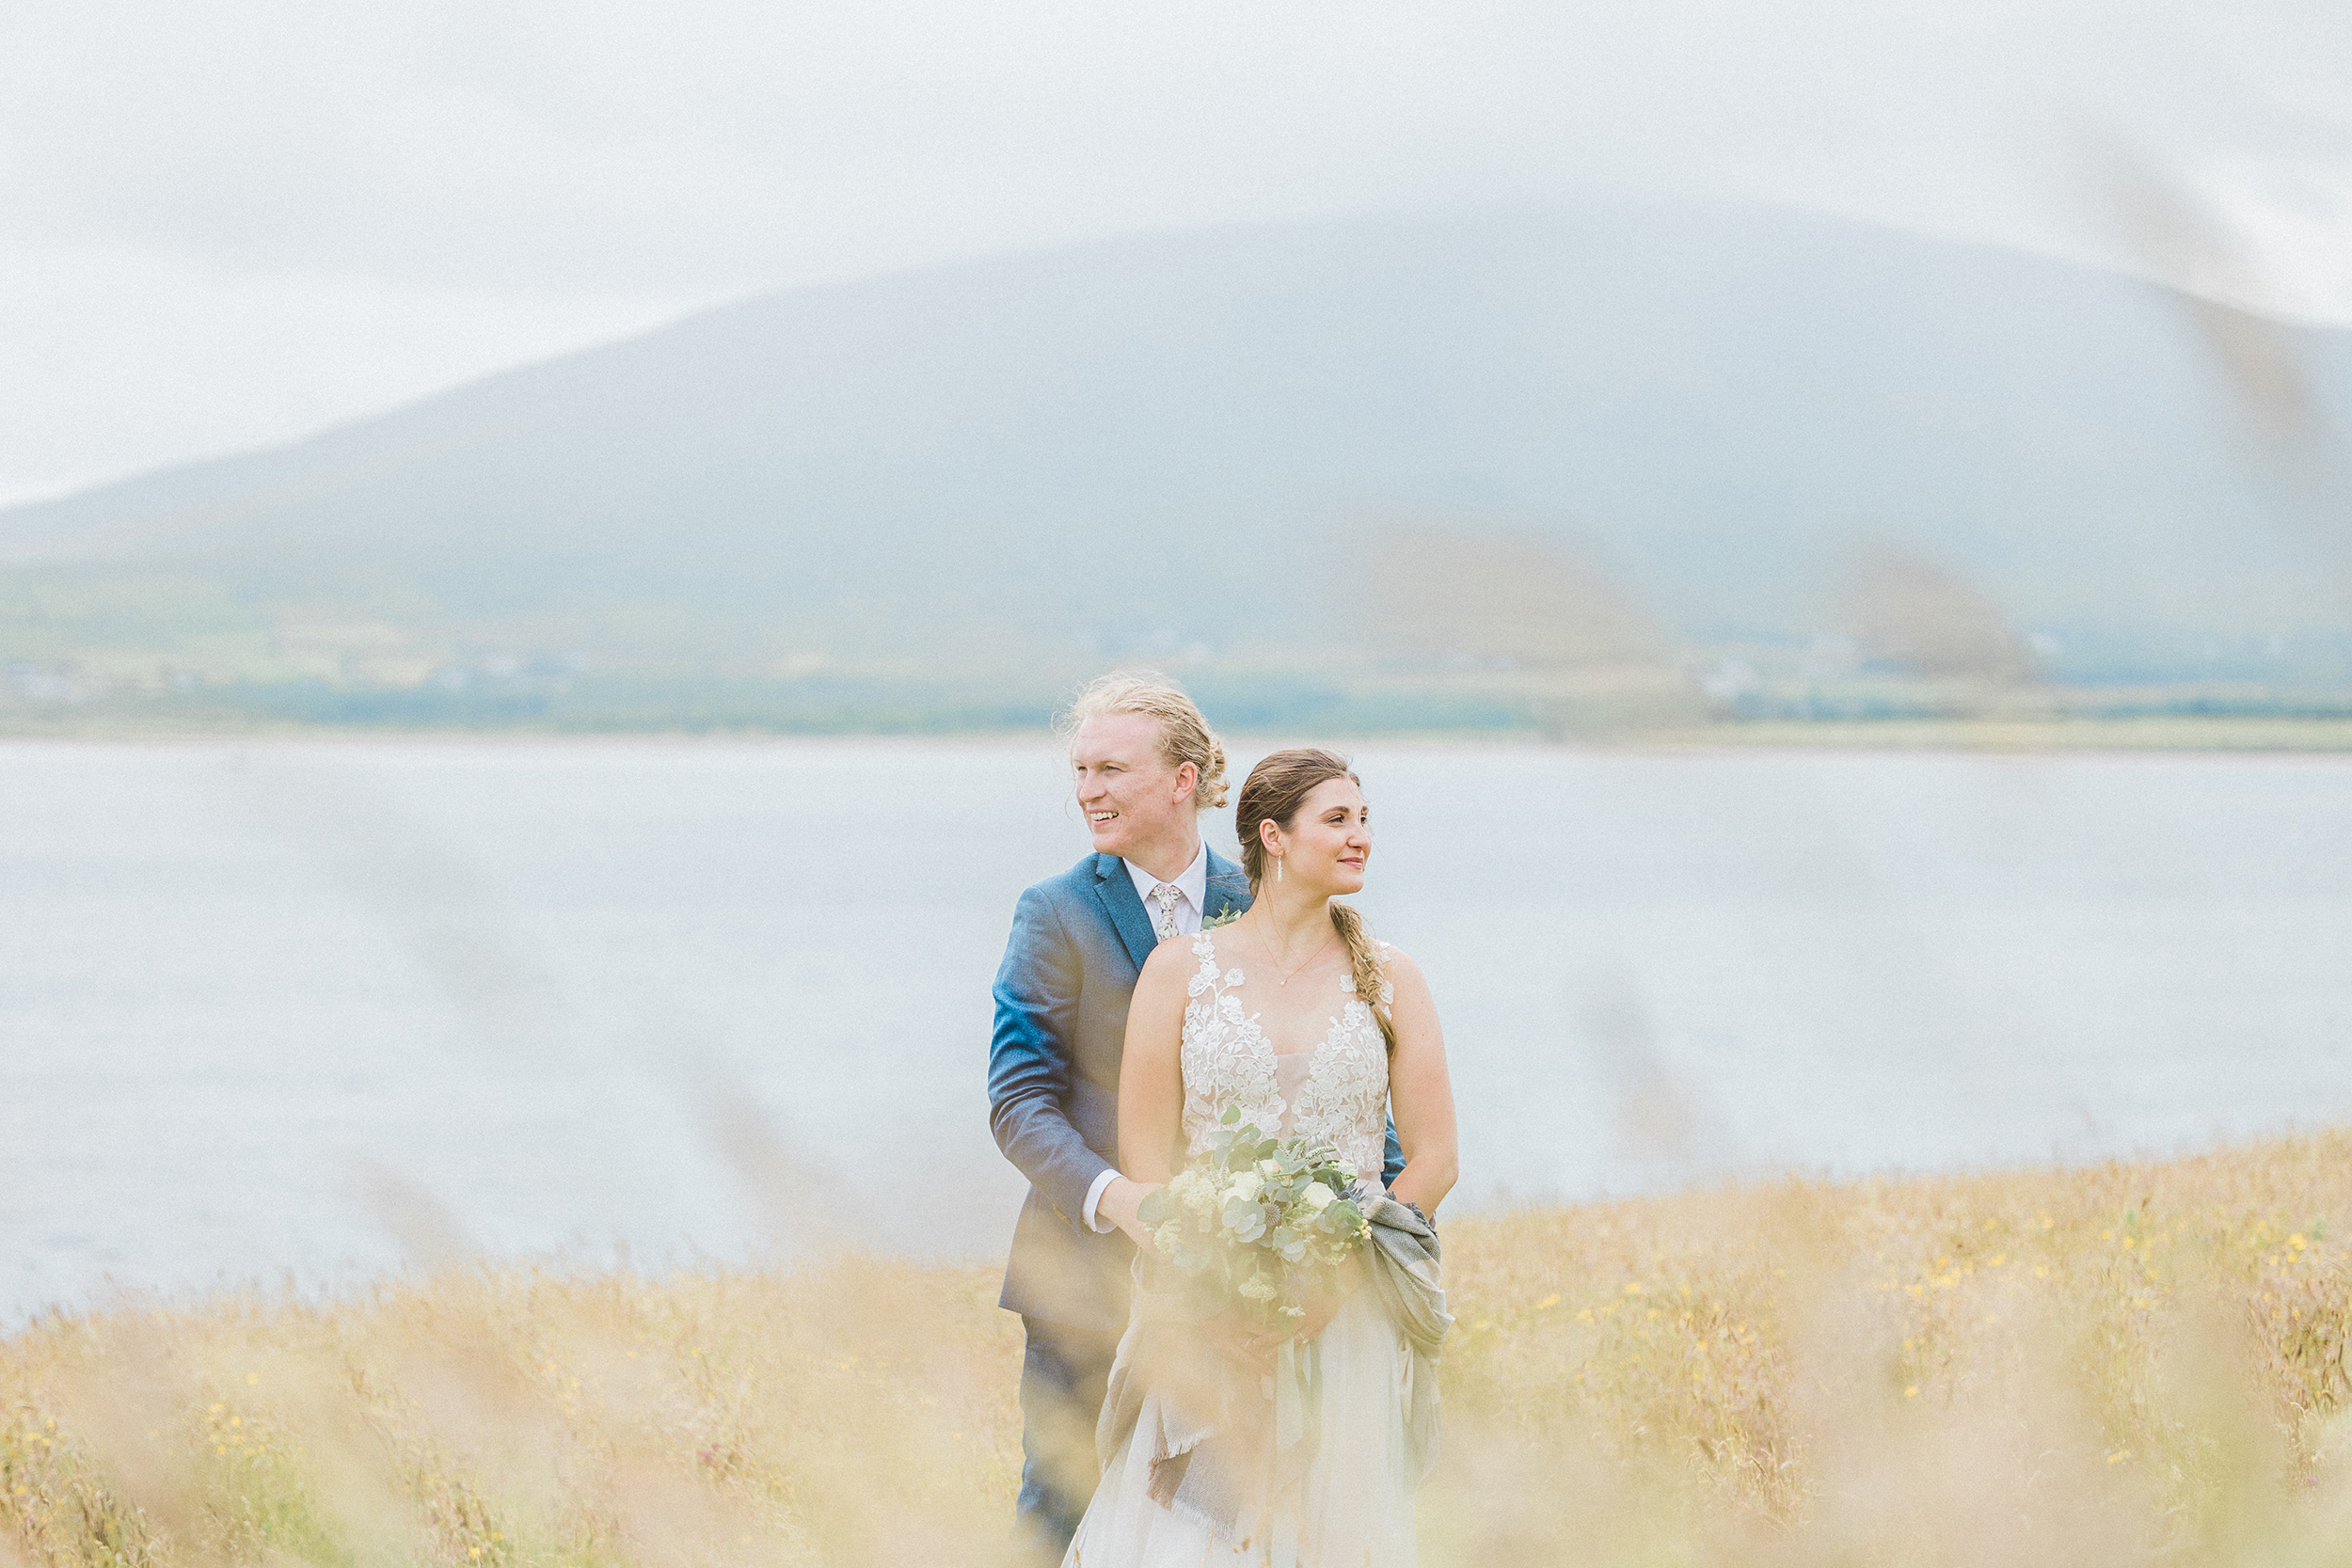 5 places to elope in Ireland